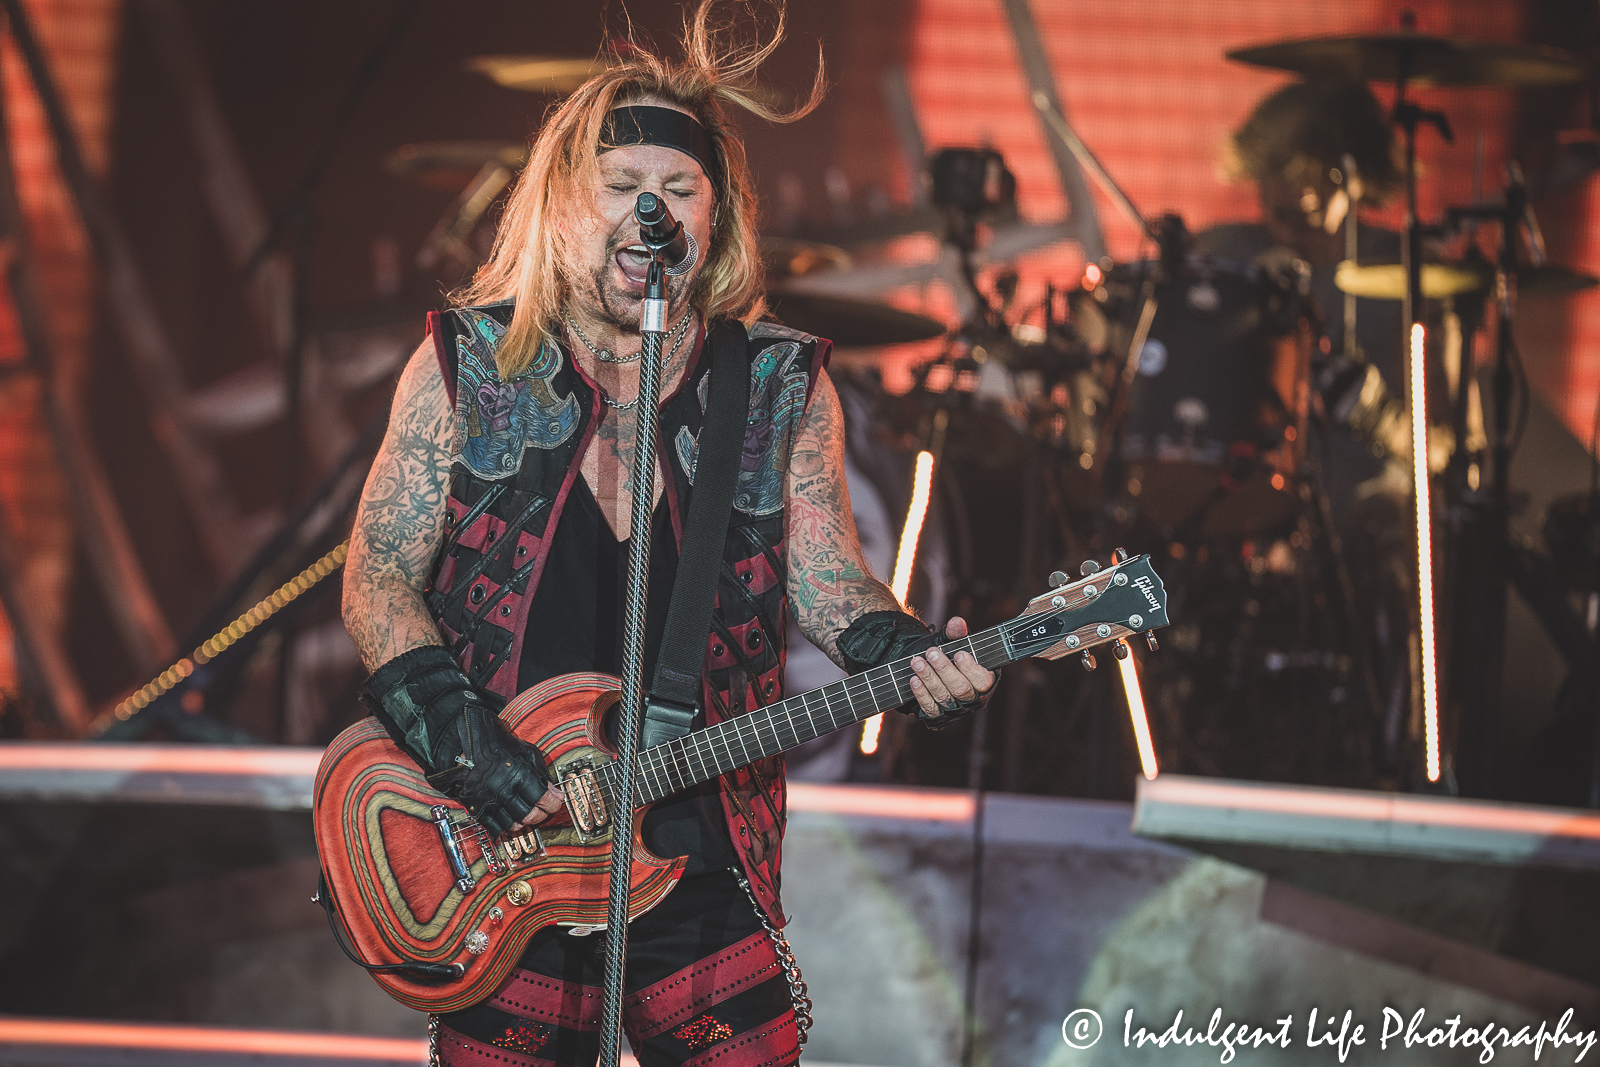 Lead singer Vince Neil singing live as he performs with drummer Tommy Lee at Kauffman Stadium in Kansas City, MO on July 19, 2022.